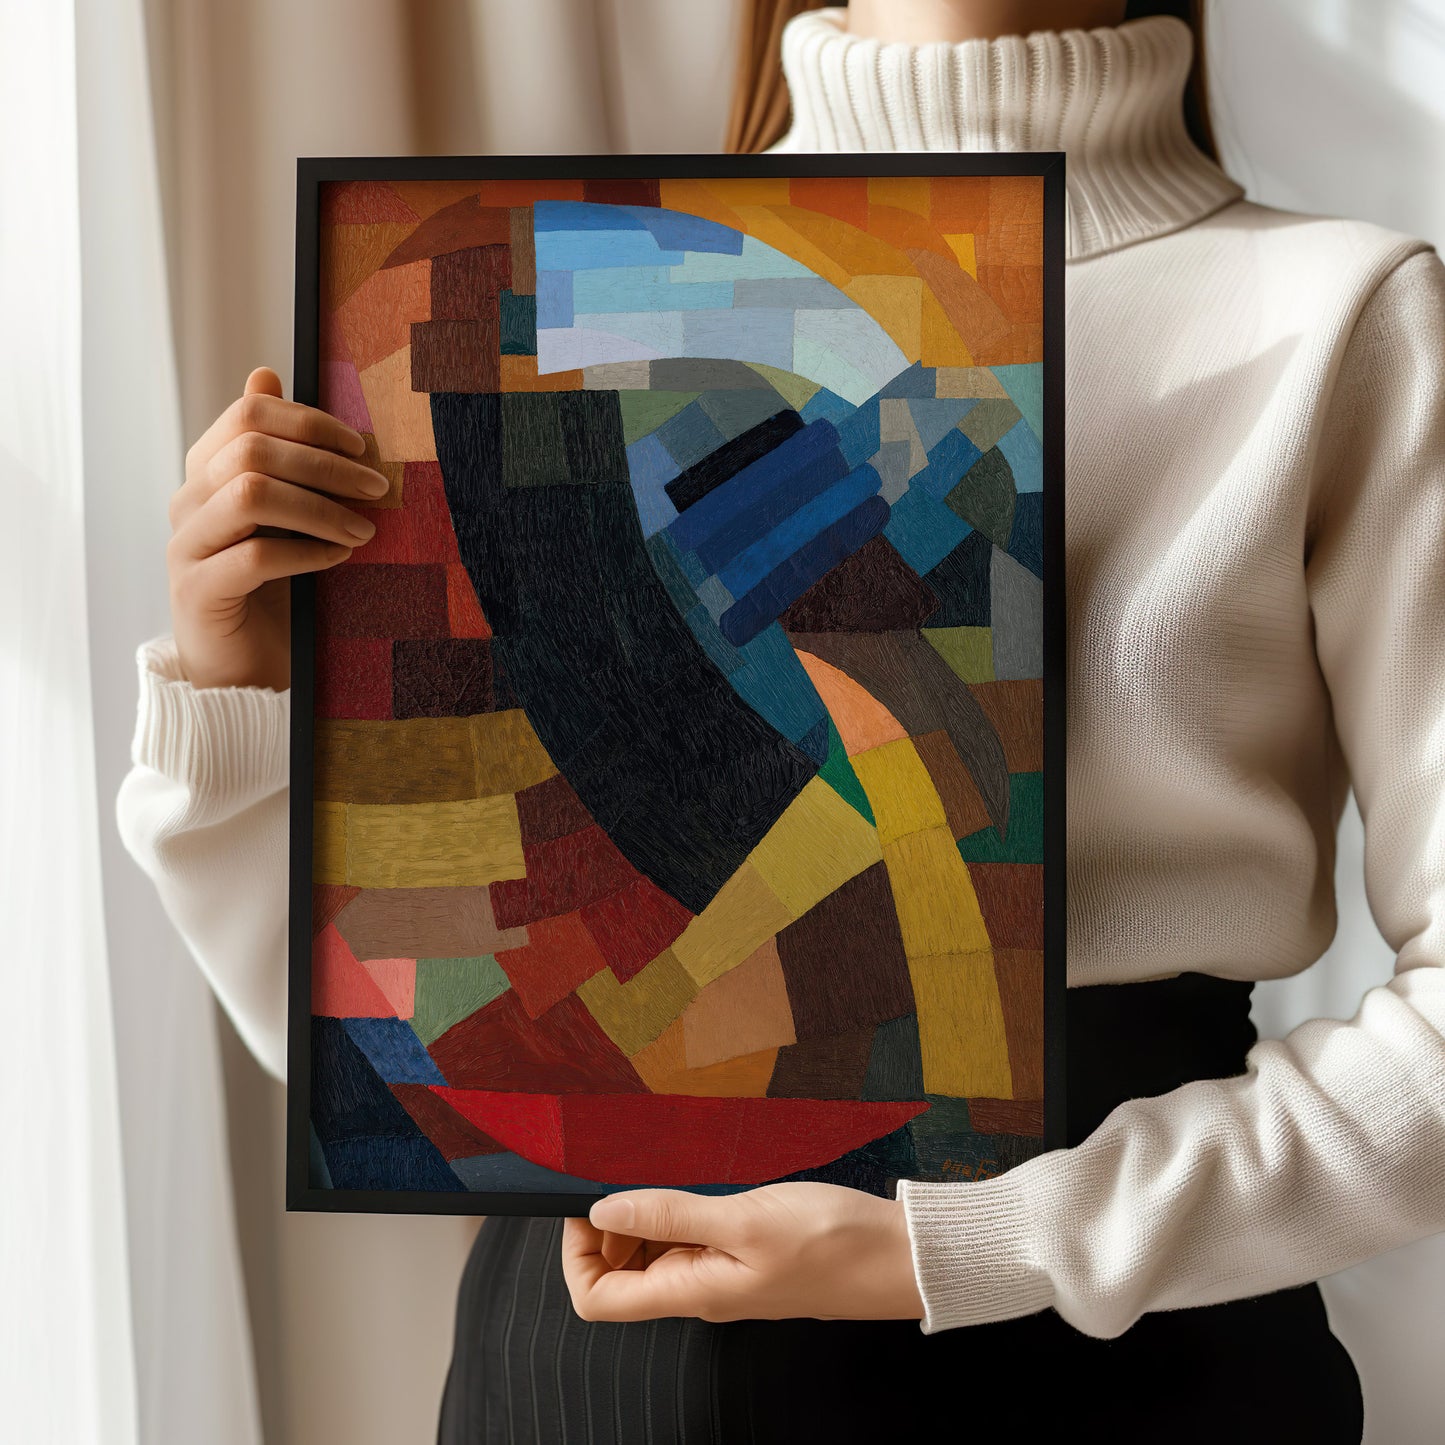 Otto Freundlich - Fragments of a Figure in All the Planes | Colorful Vintage Abstract Art (available framed or unframed)